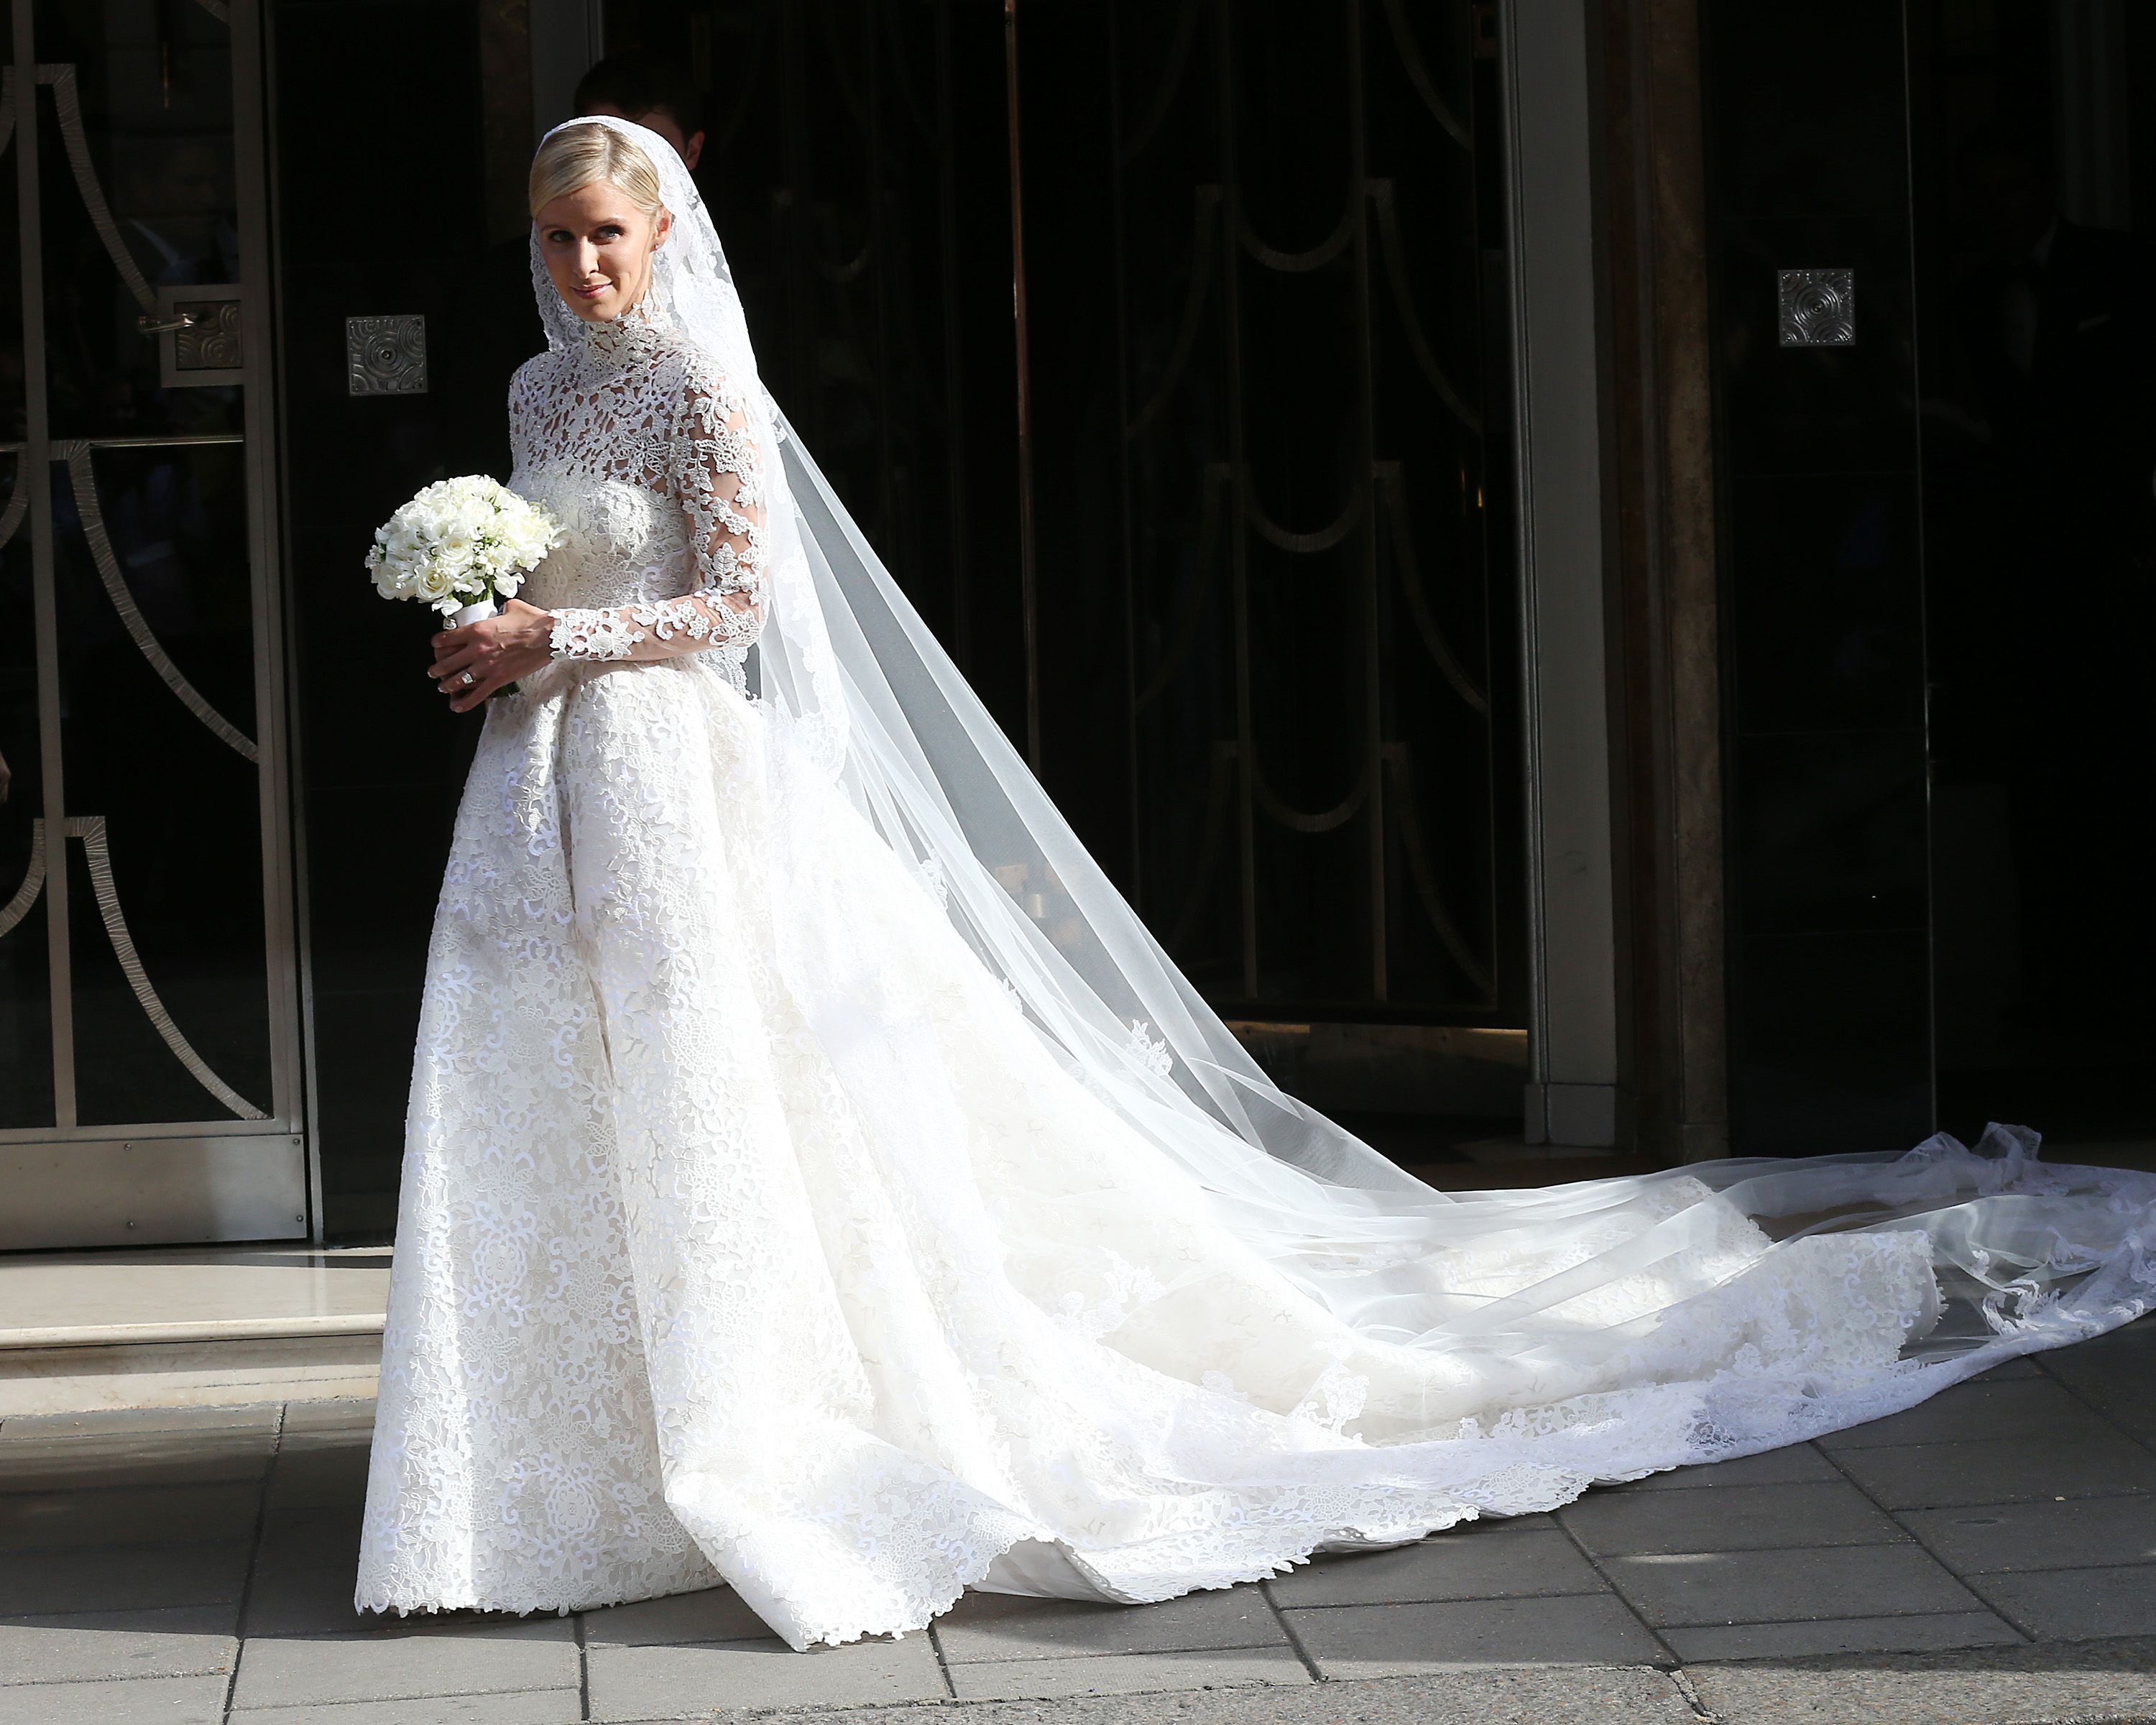 The Most Famous Wedding Dresses Designers 6 Top Wedding Dress Designers From Around The World